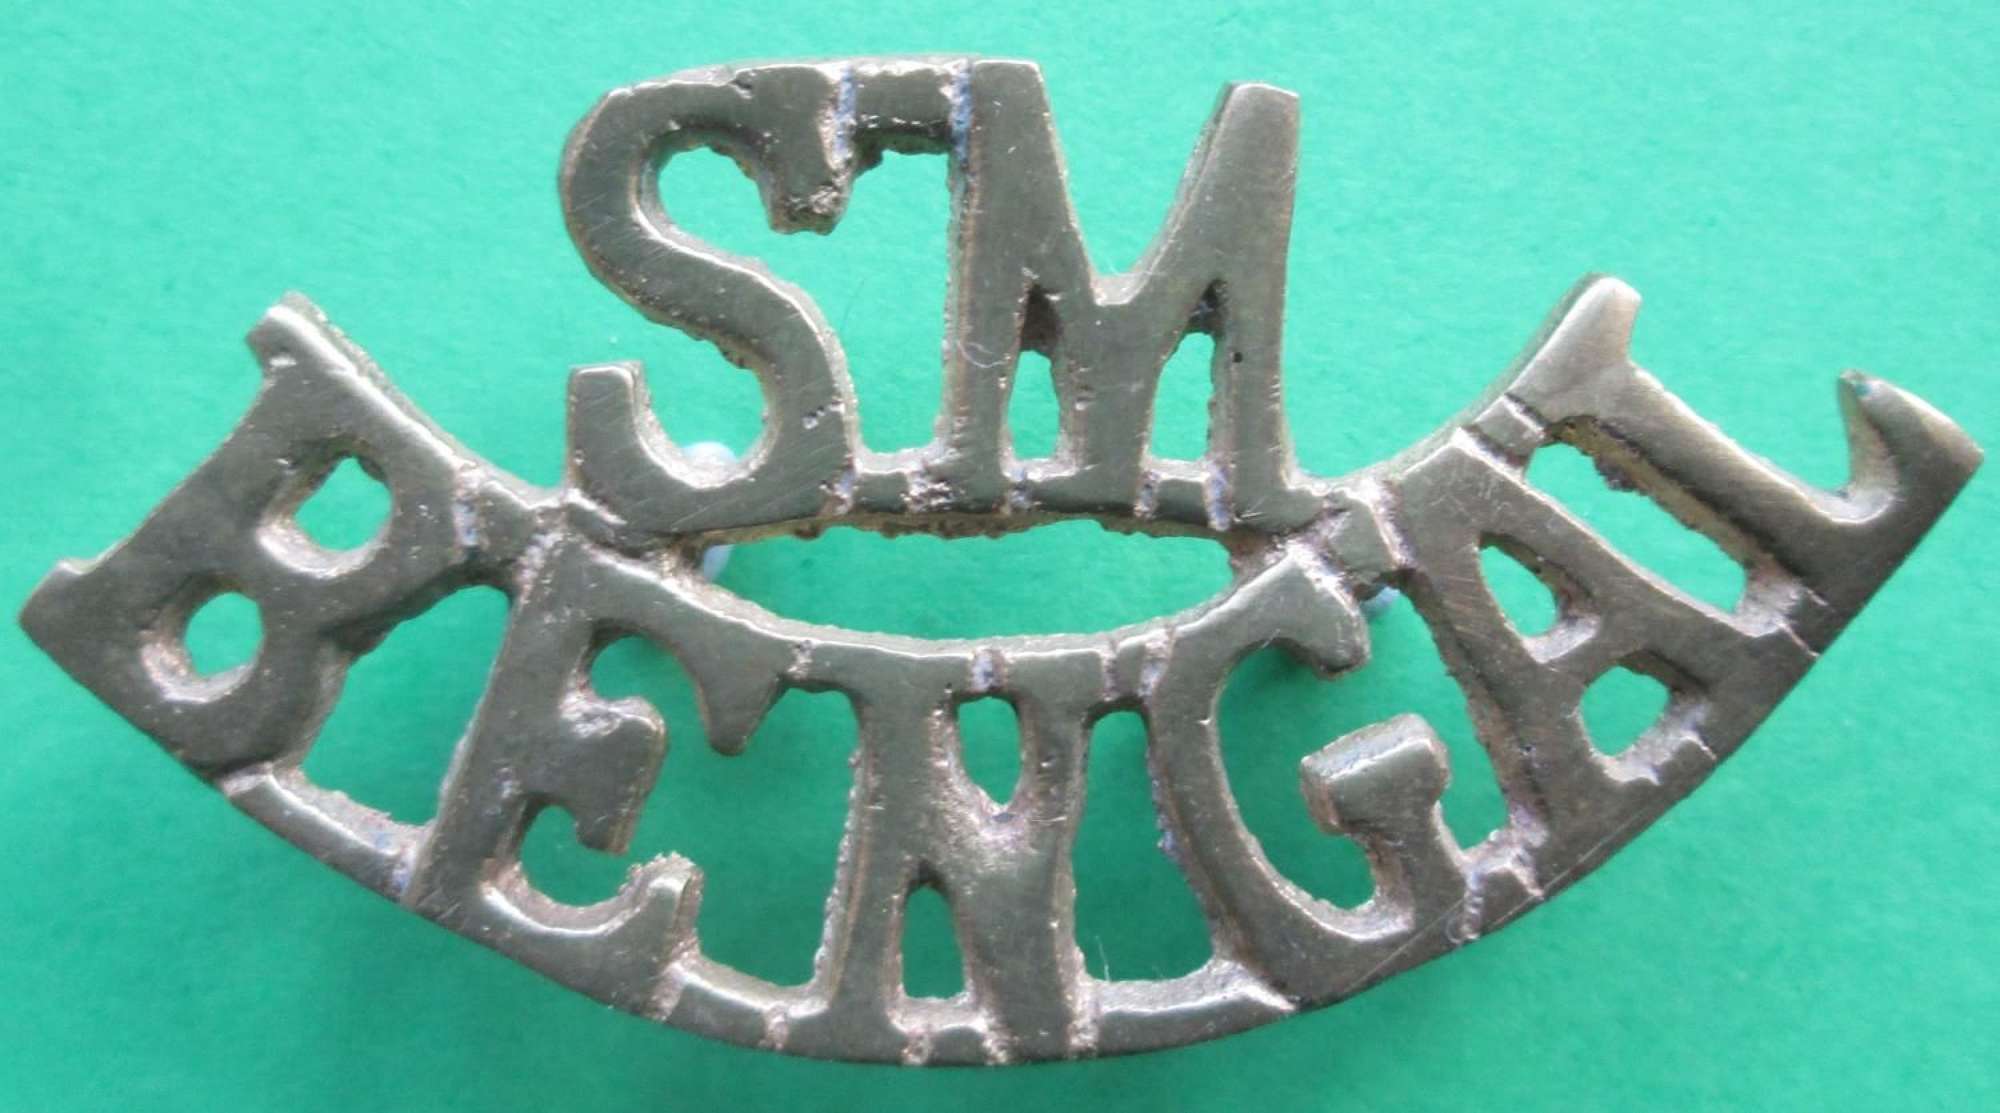 A BENGAL SAPPERS AND MINERS SHOULDER TITLE